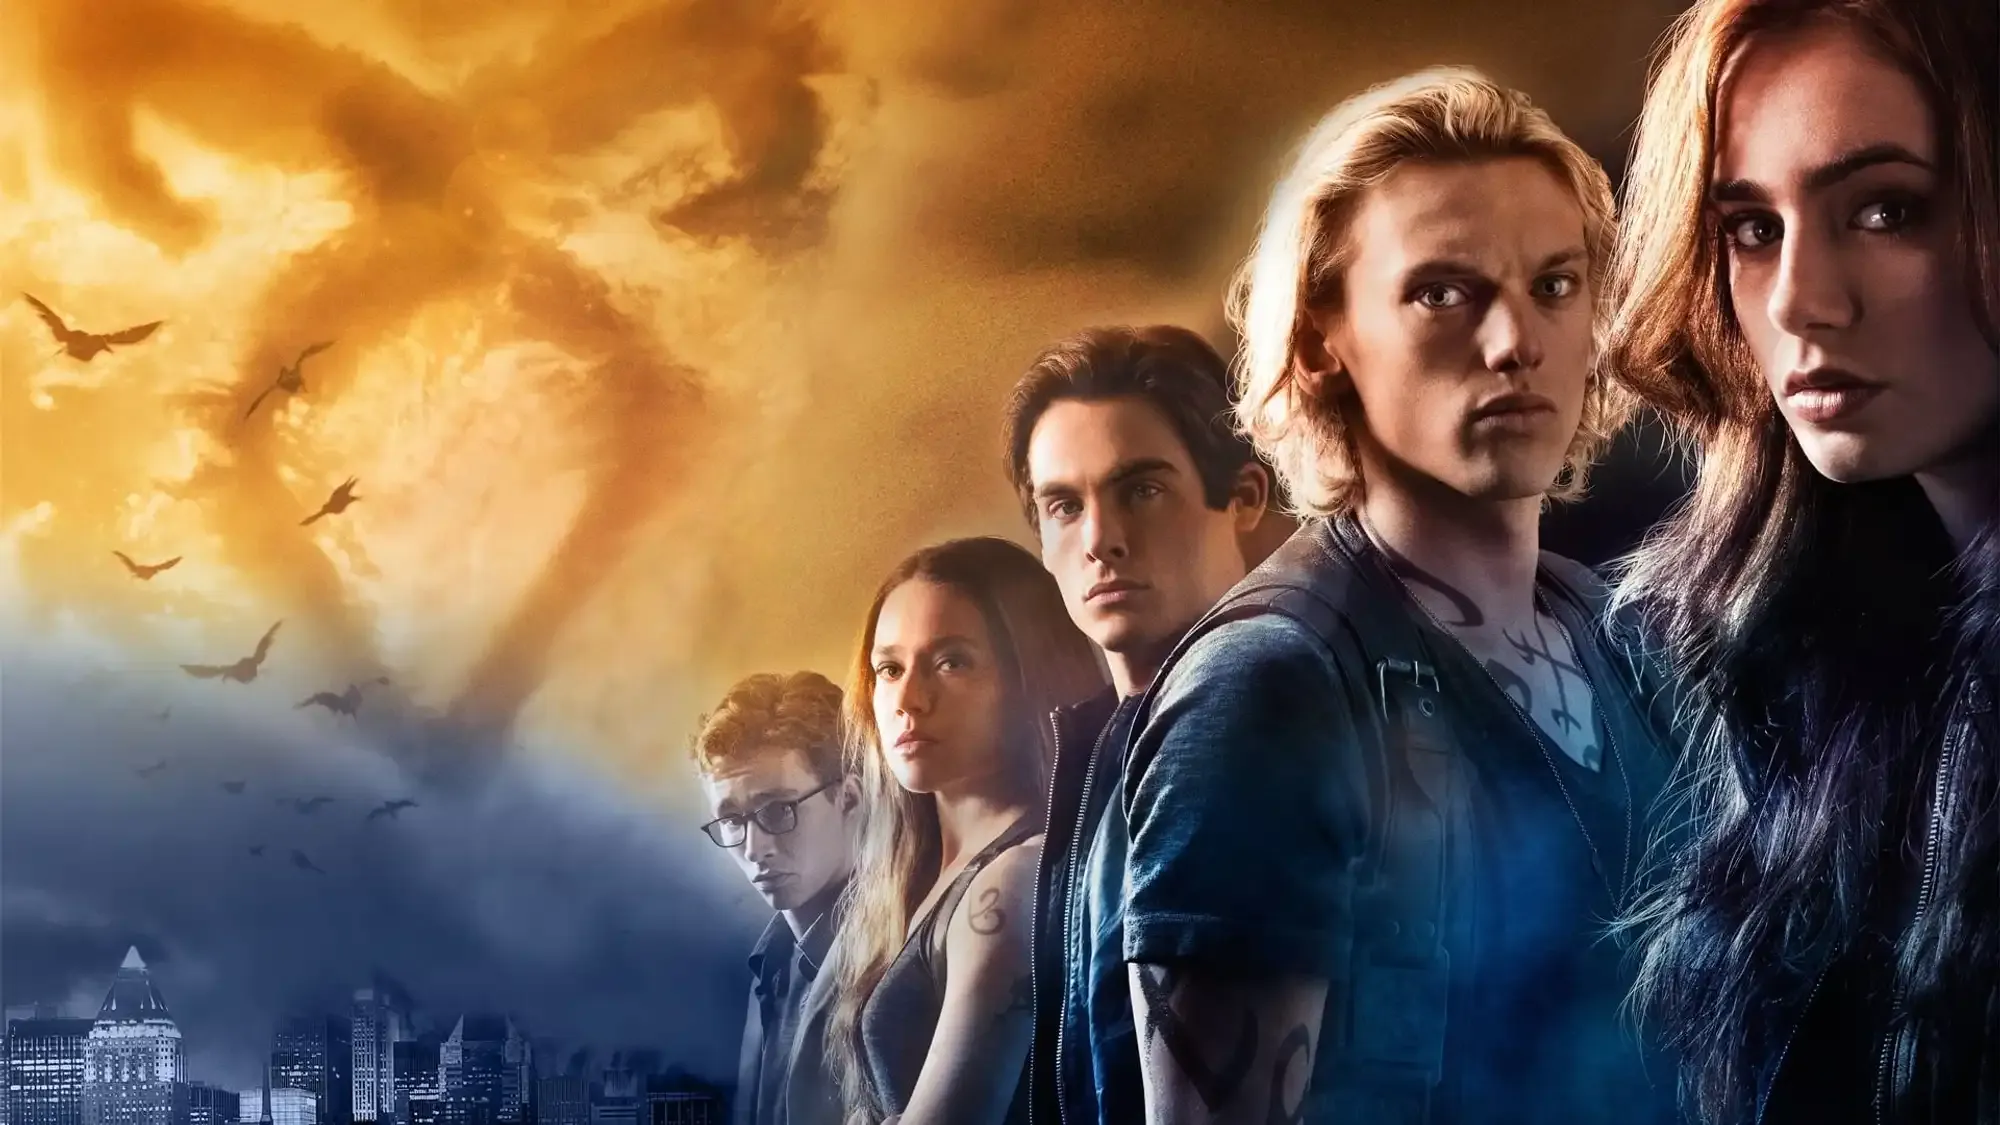 The Mortal Instruments: City of Bones movie review